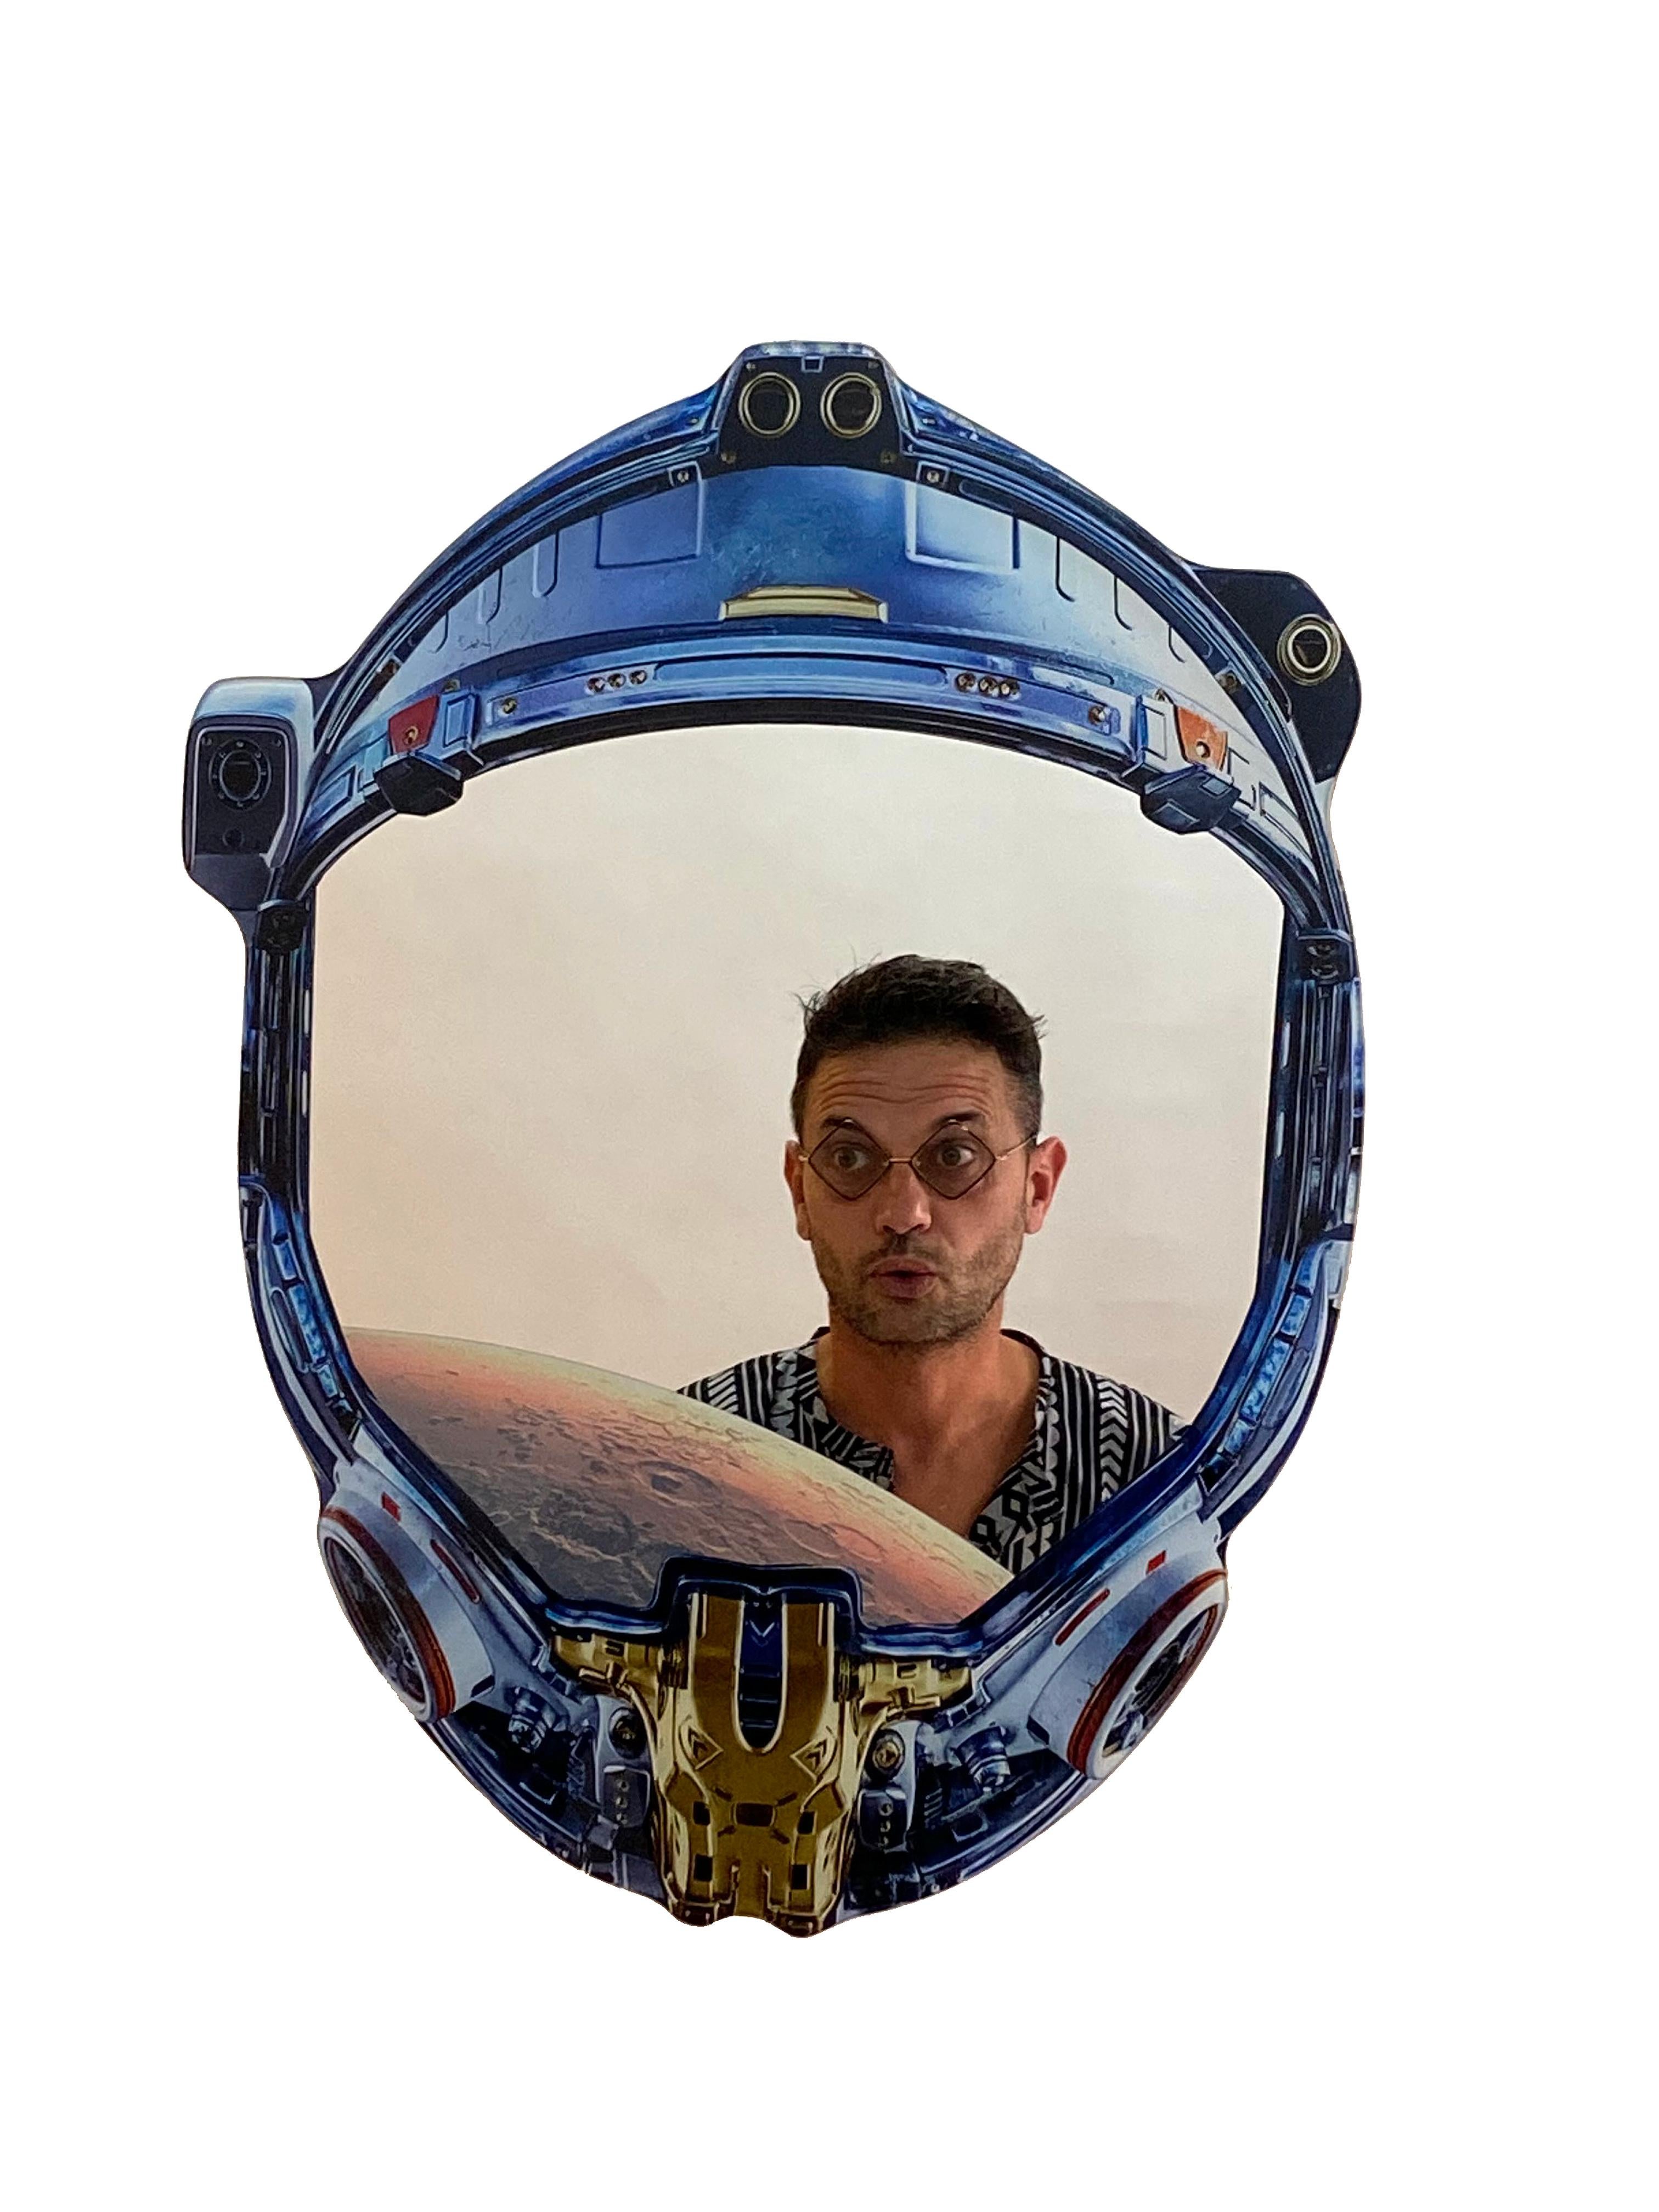 Italian Space Cowboy n°10/30, Contemporary Wall Mirror with Printed Astronaut Helmet